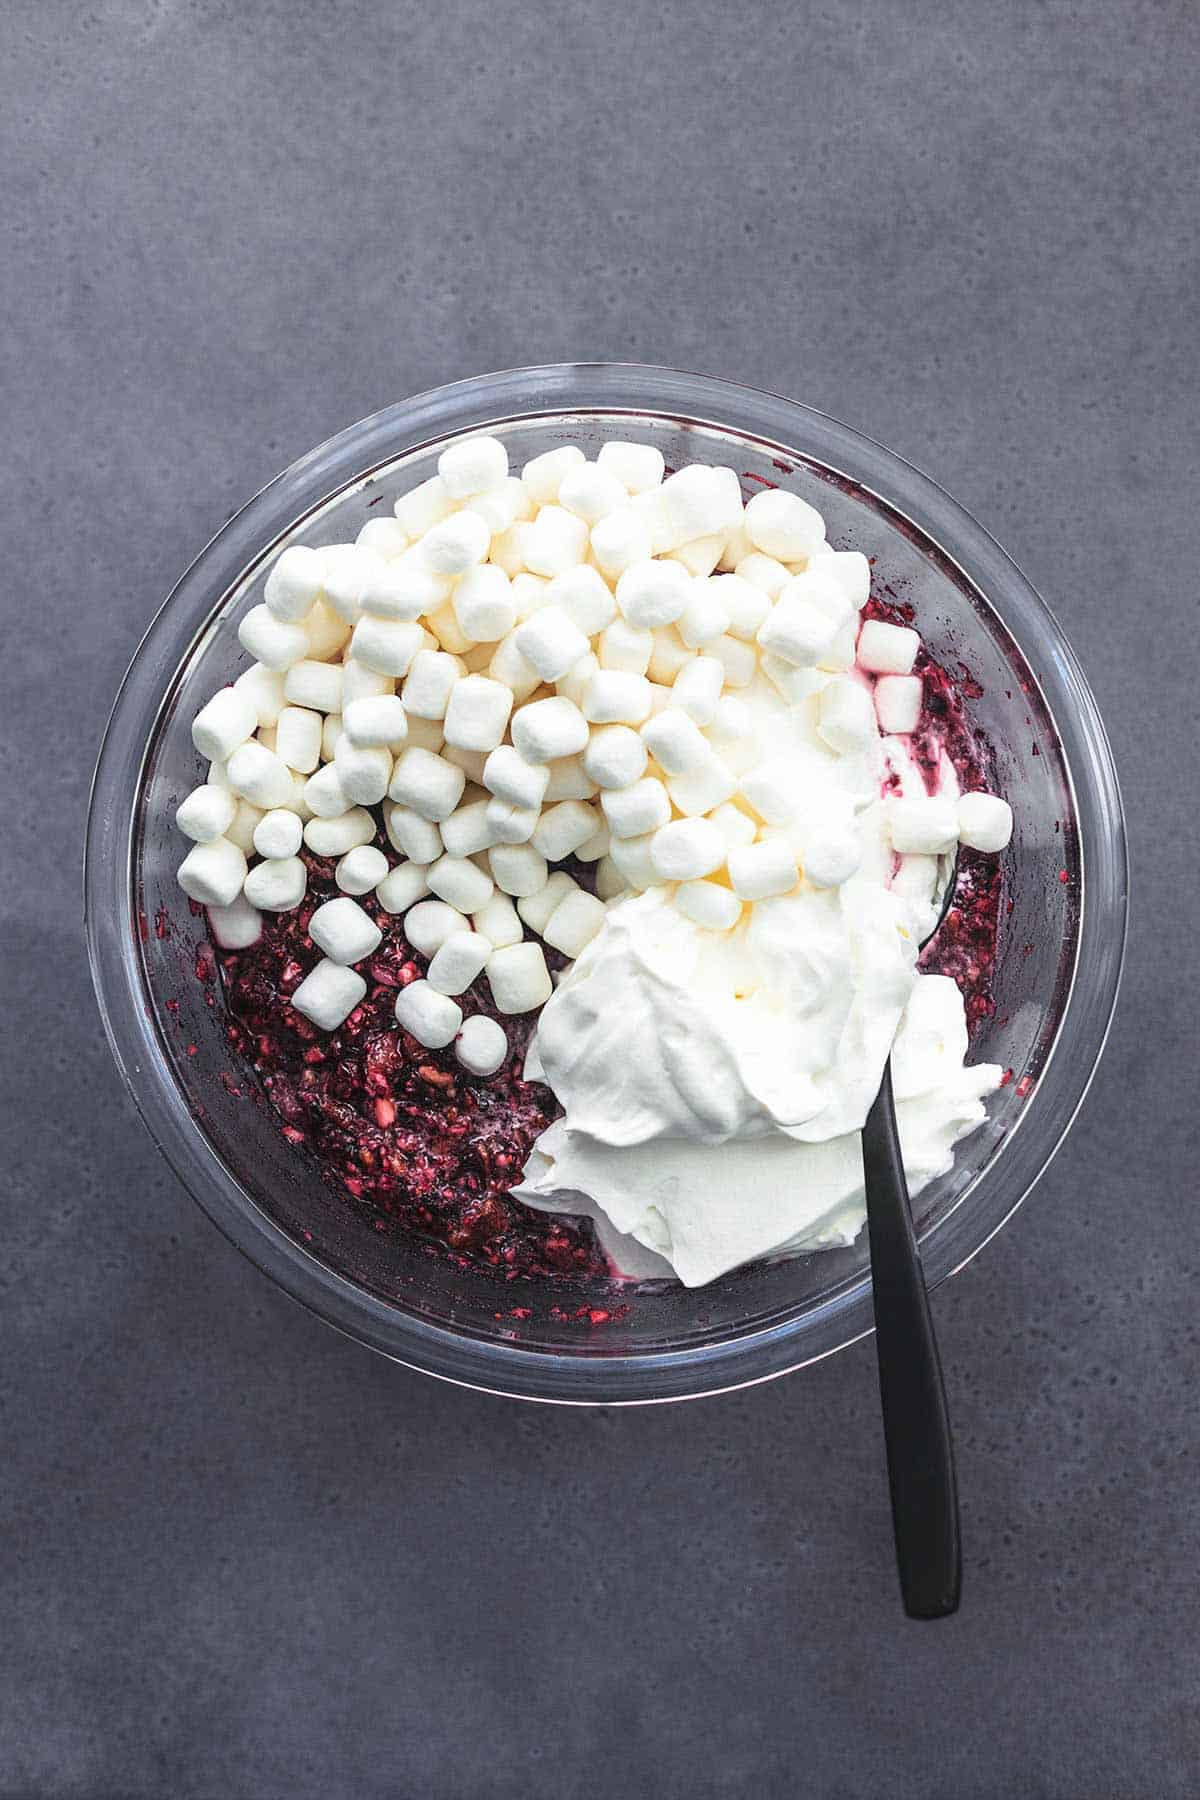 top view of a glass bowl filled with whipped cream, marshmallows, cranberries, and nuts.